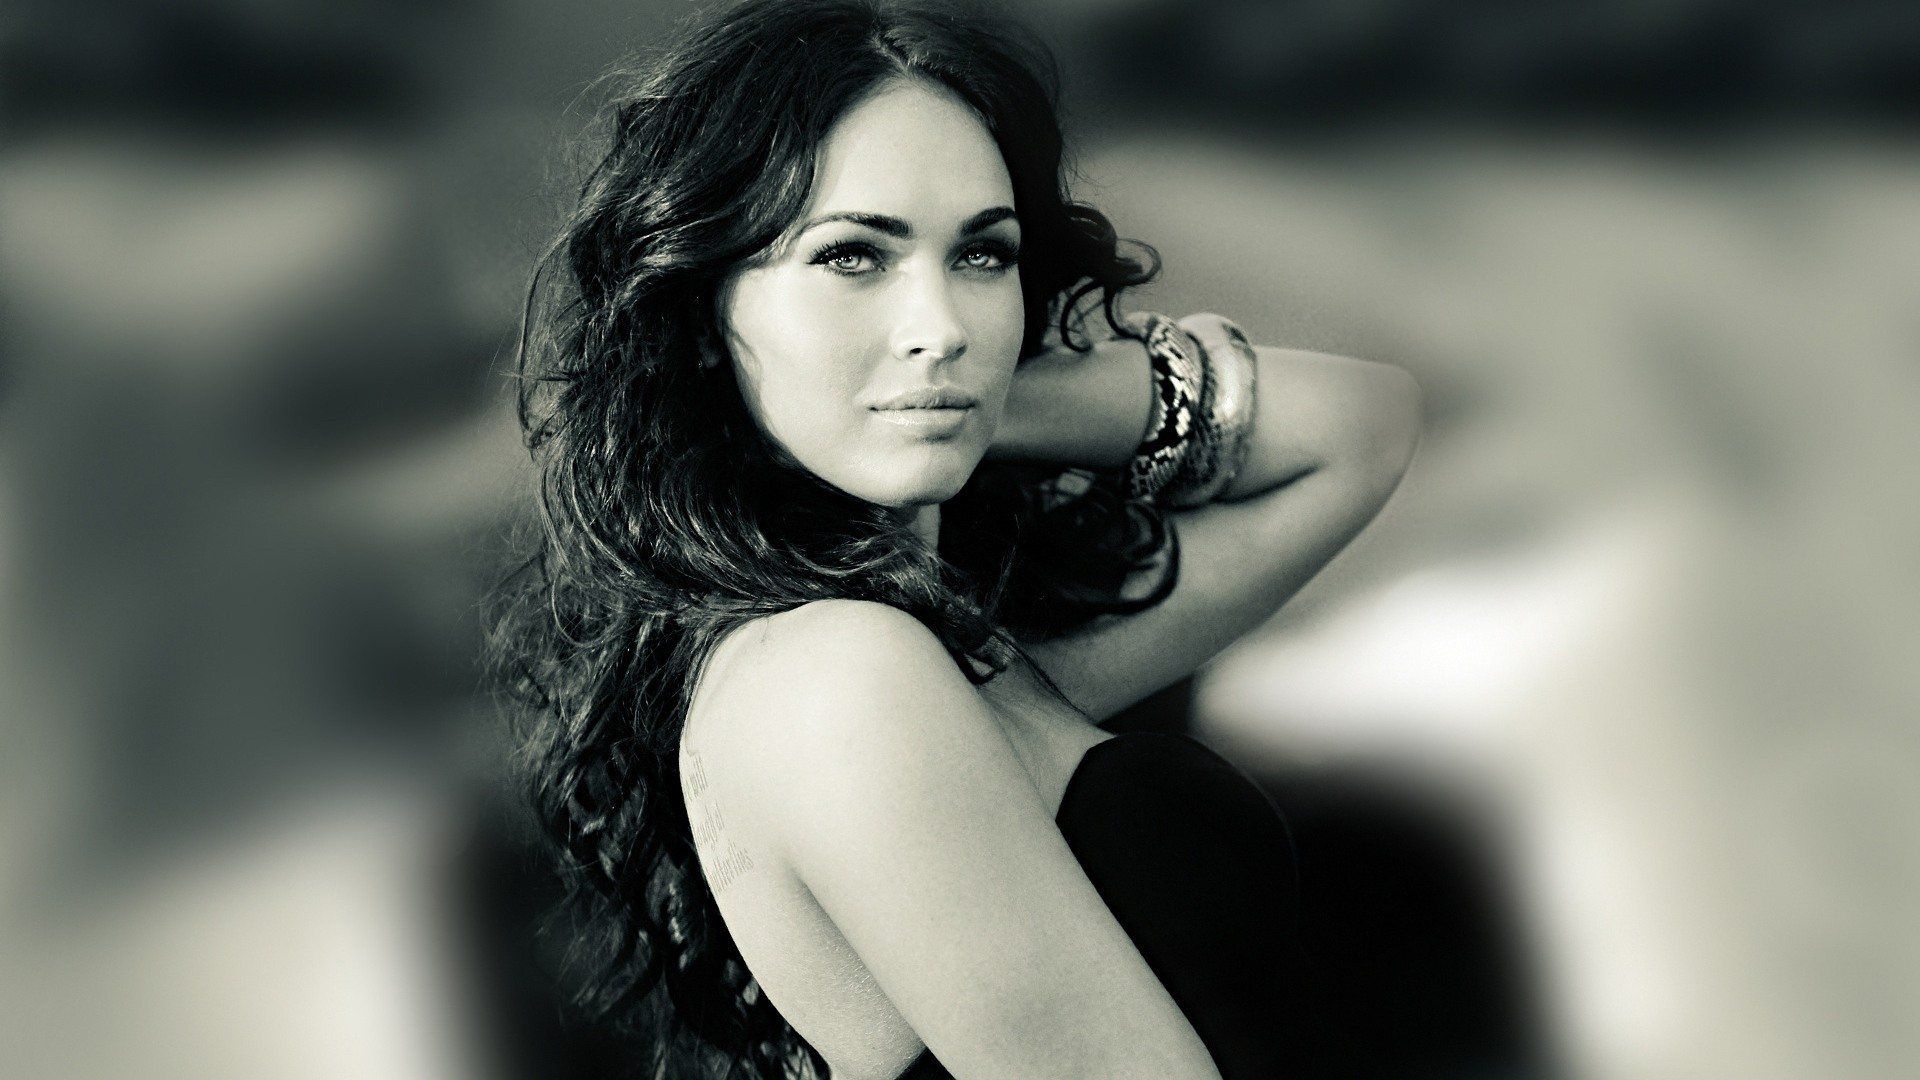 Megan Fox HD Wallpapers | Mean Fox Background Images | Cool Wallpapers